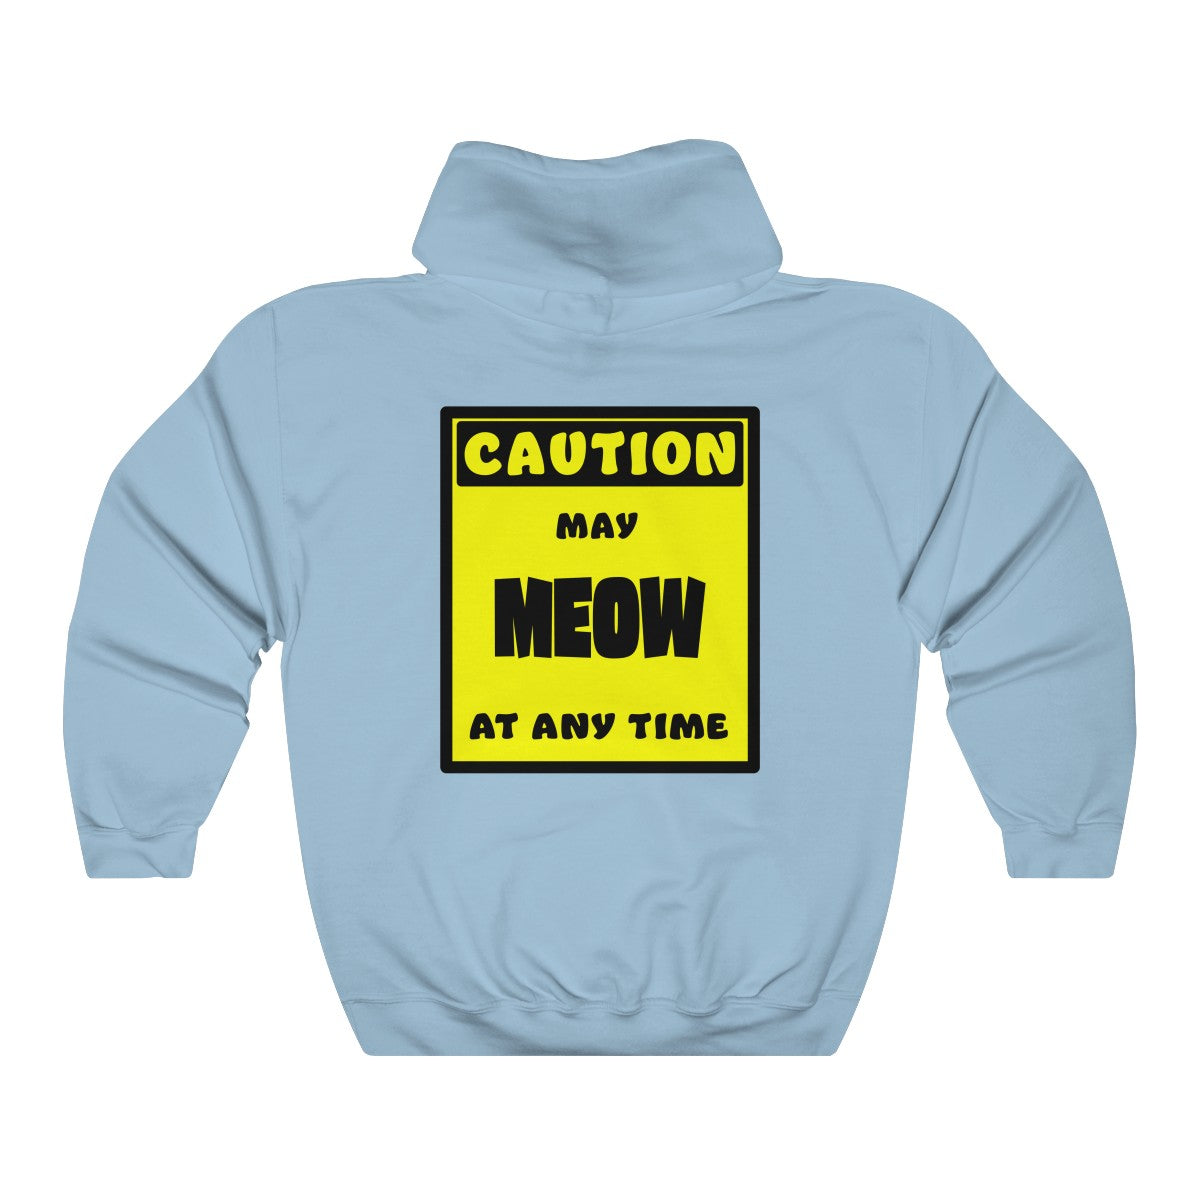 CAUTION! May MEOW at any time! - Hoodie Hoodie AFLT-Whootorca Light Blue S 